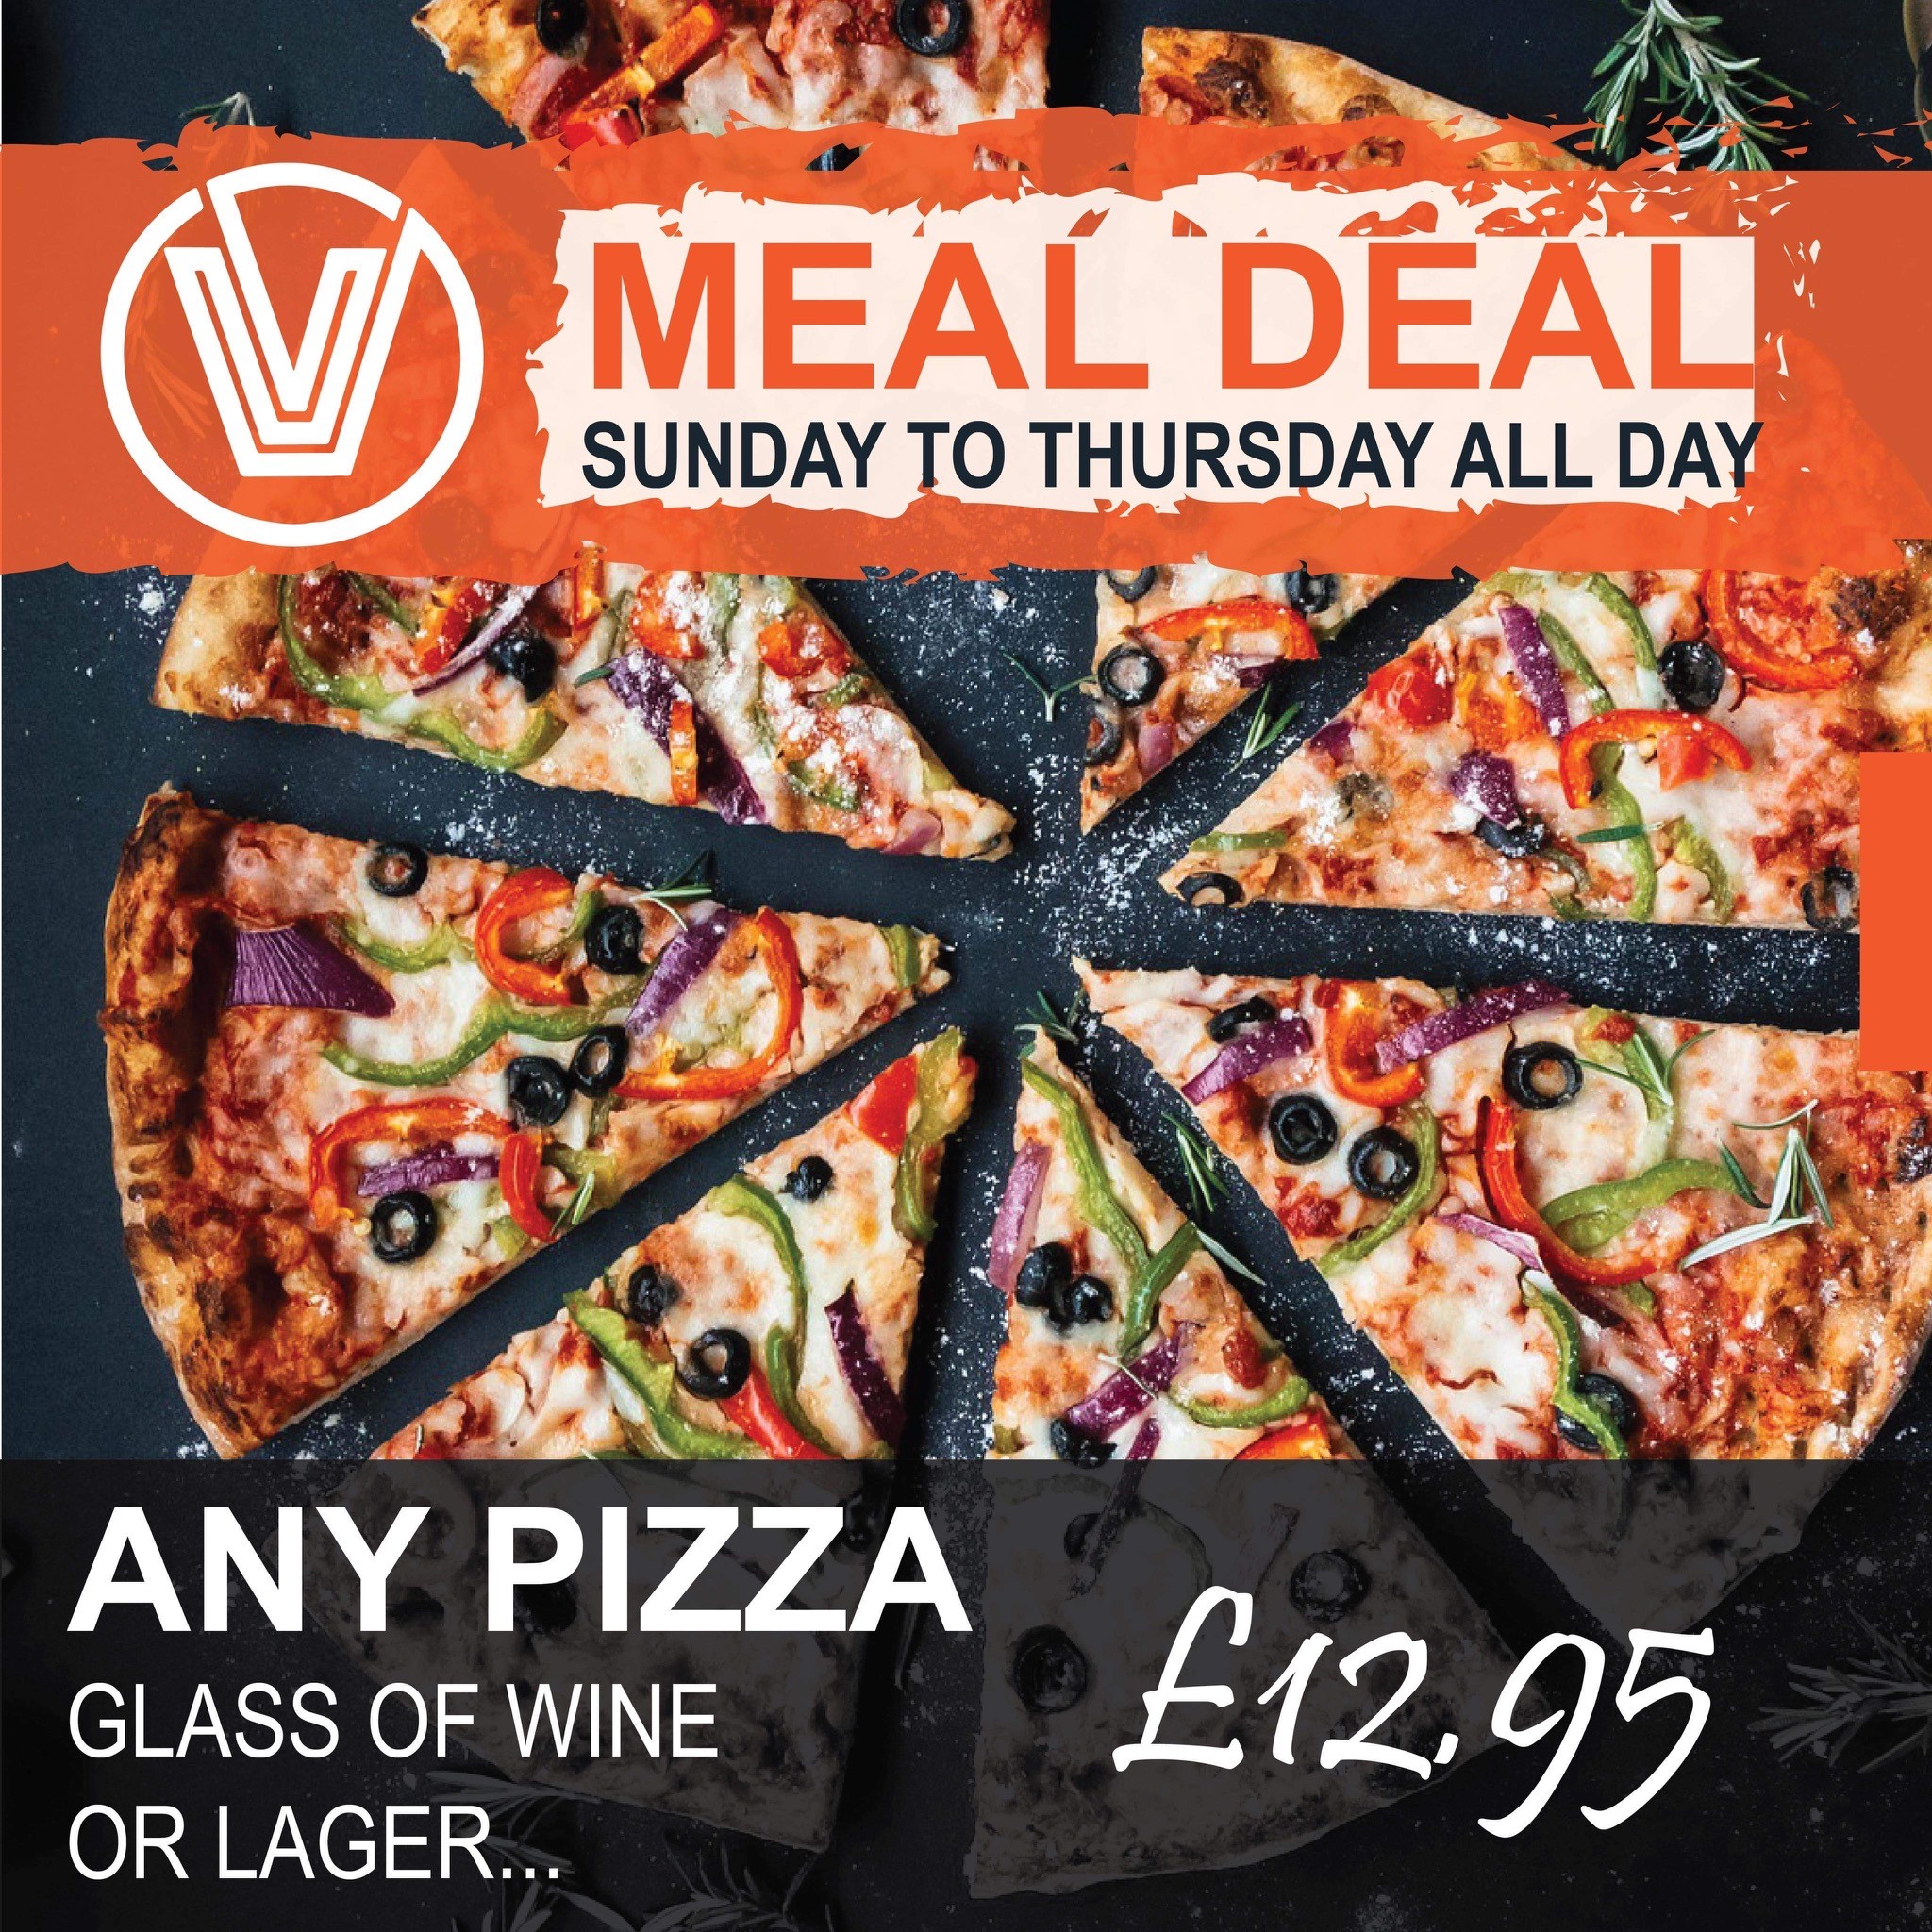 Meal Deals - Sunday to Thursday All Day. Any Pizza, Glass of Wine or Lager £12.95